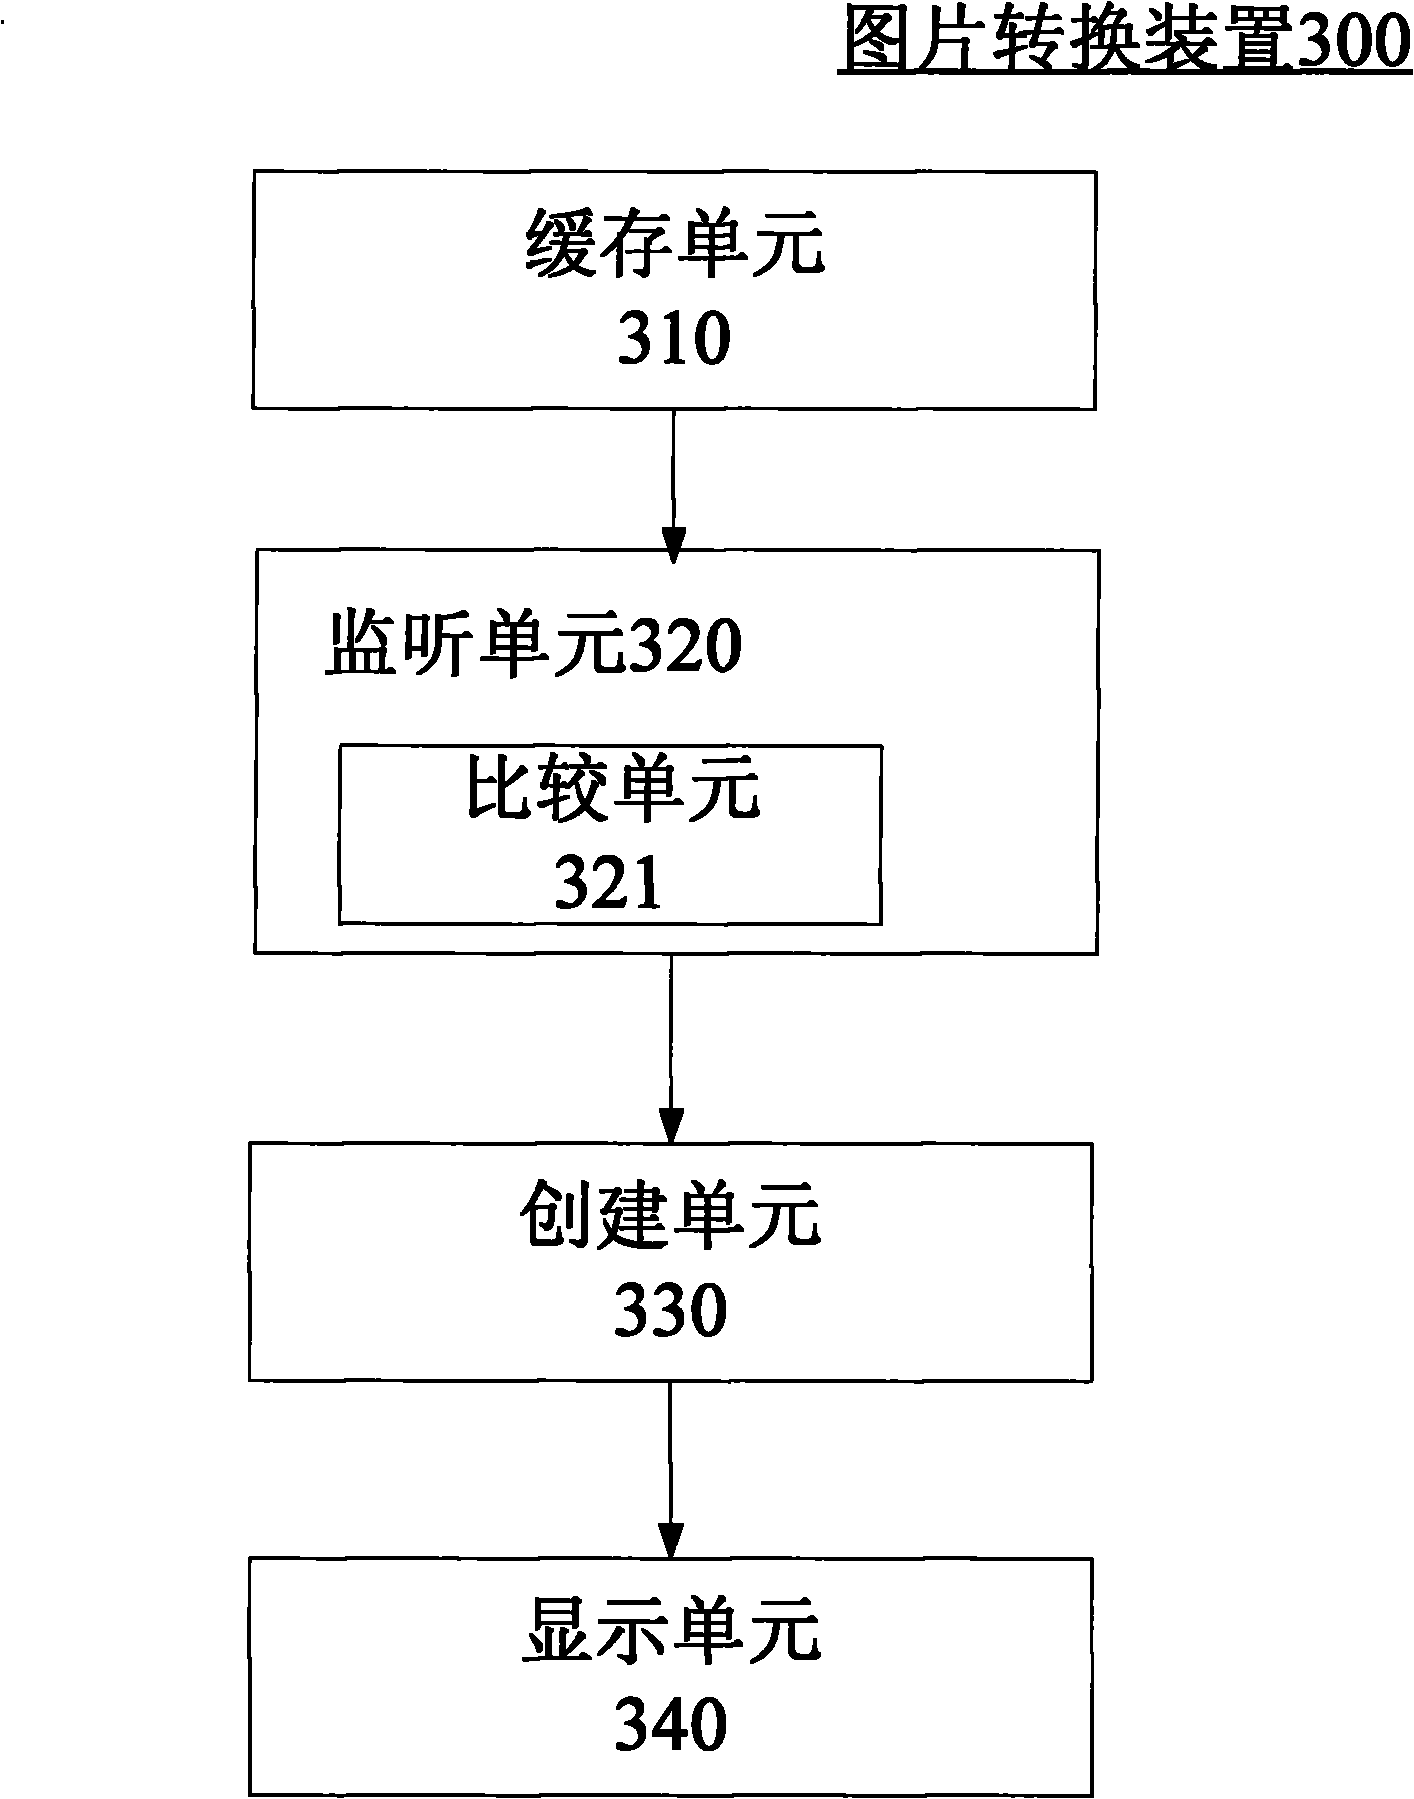 Mobile terminal-based image converting method and device